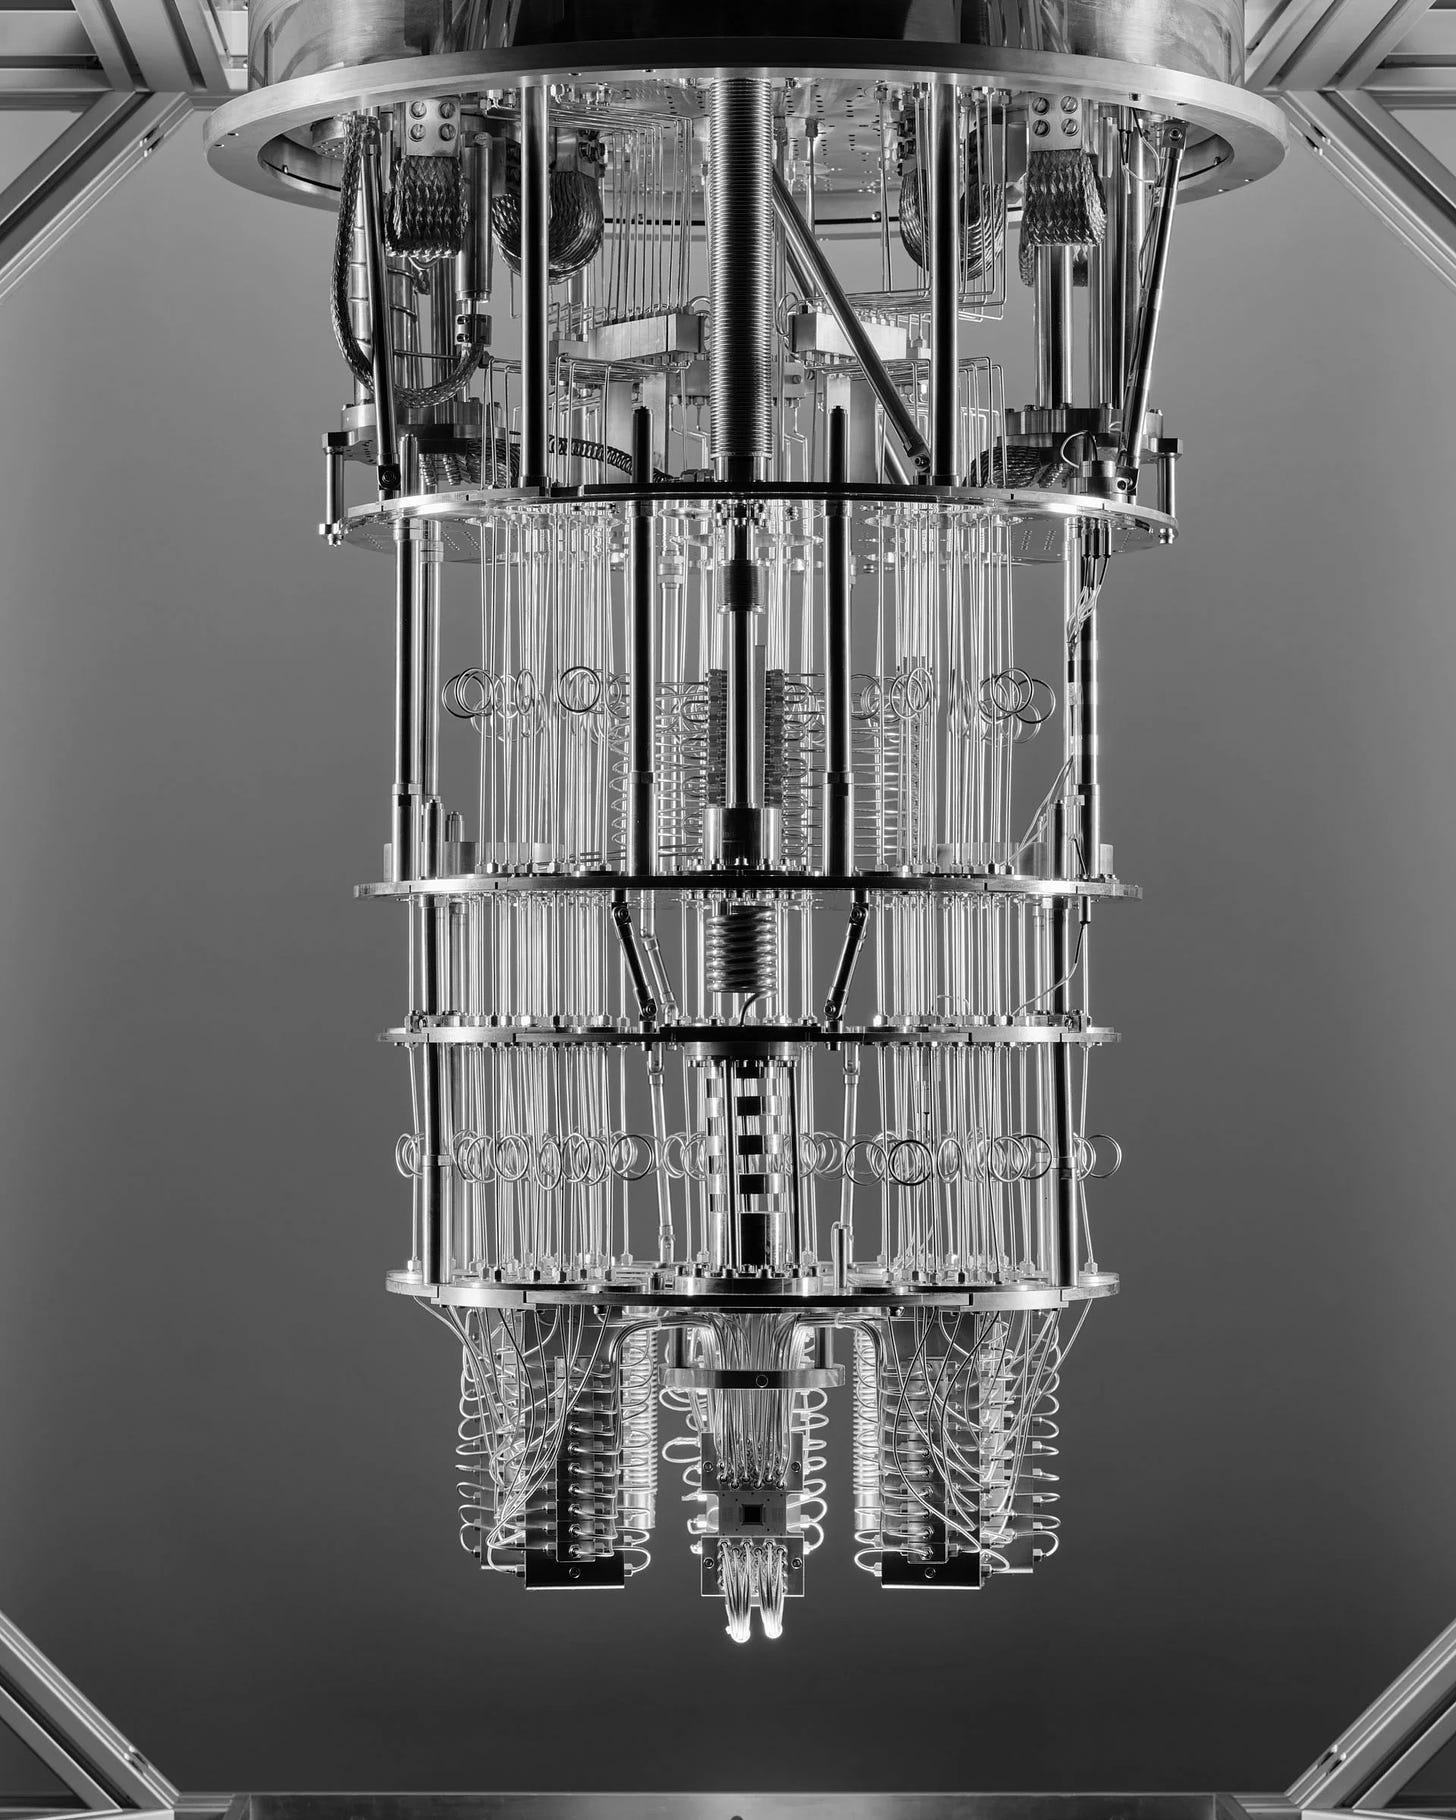 Real Quantum Computer (Image Source Thomas Prior for TIME)